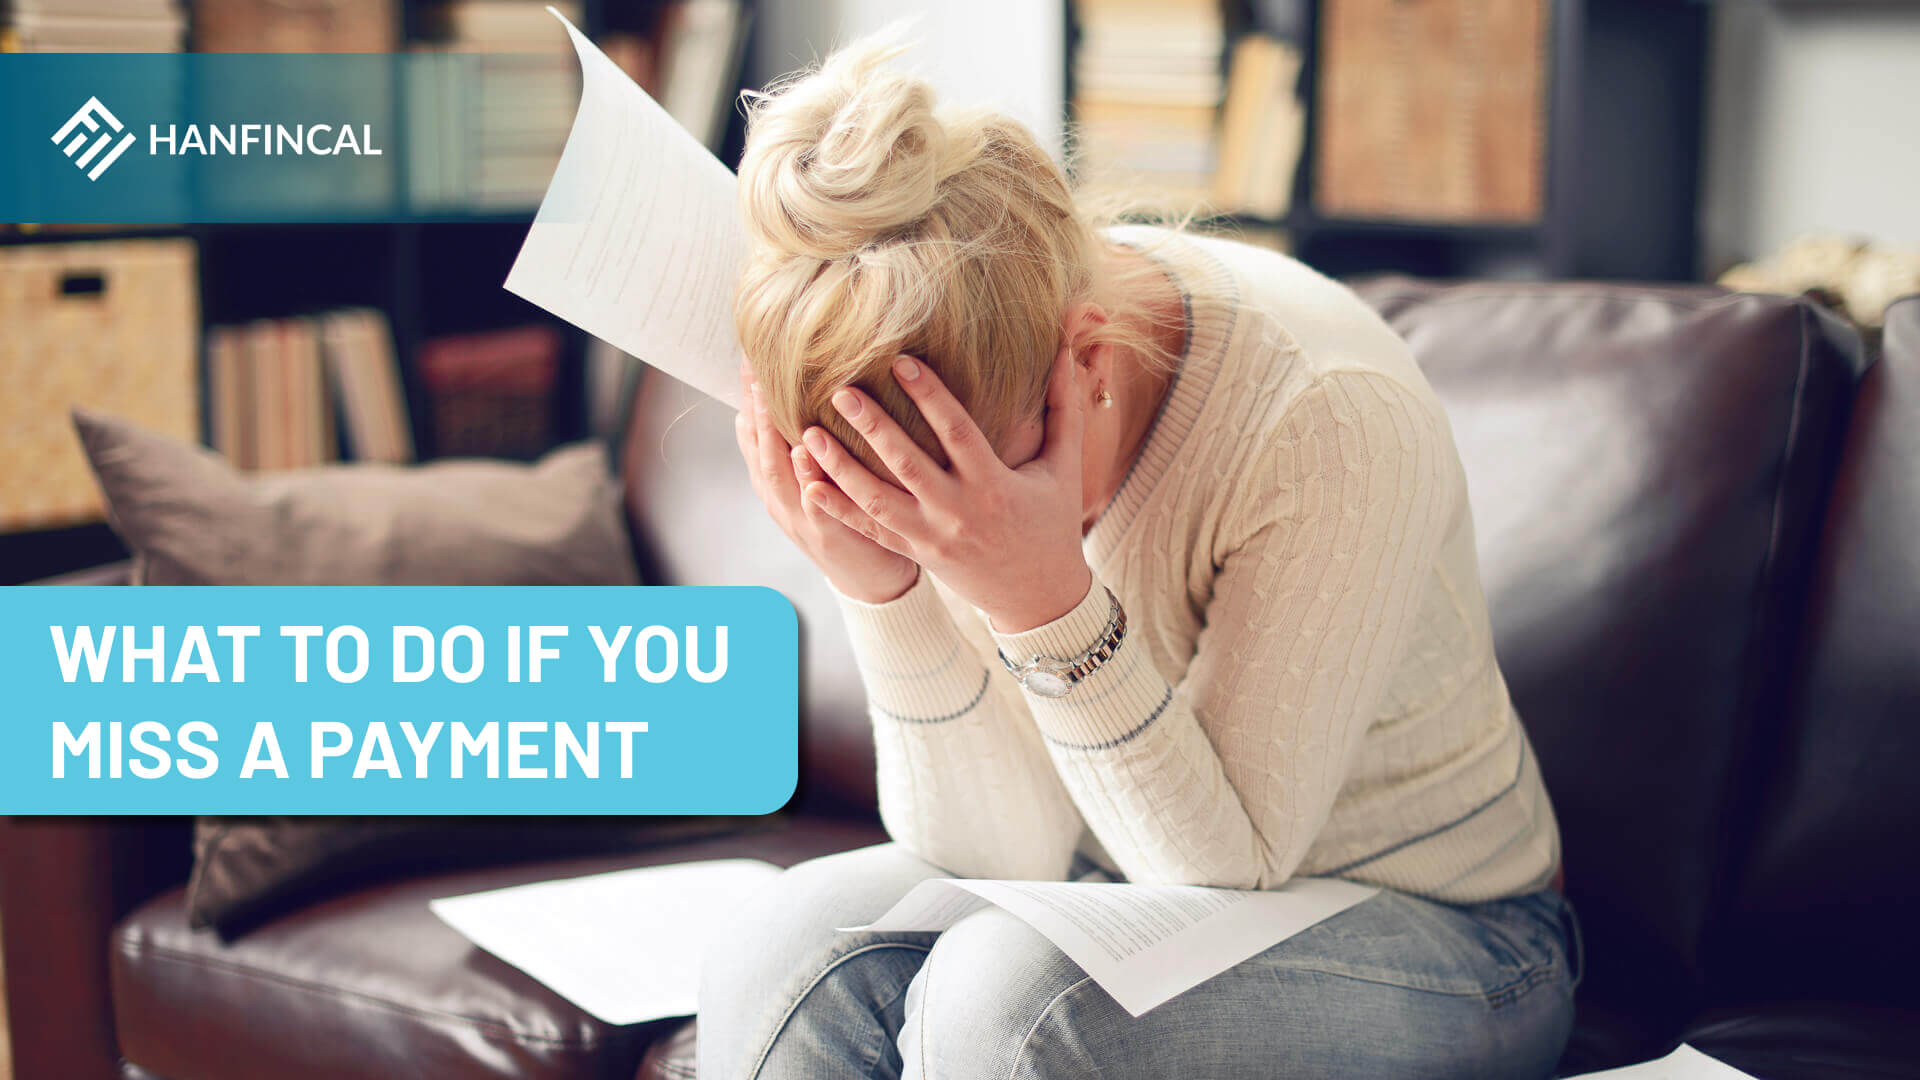 What to do if you miss a payment?